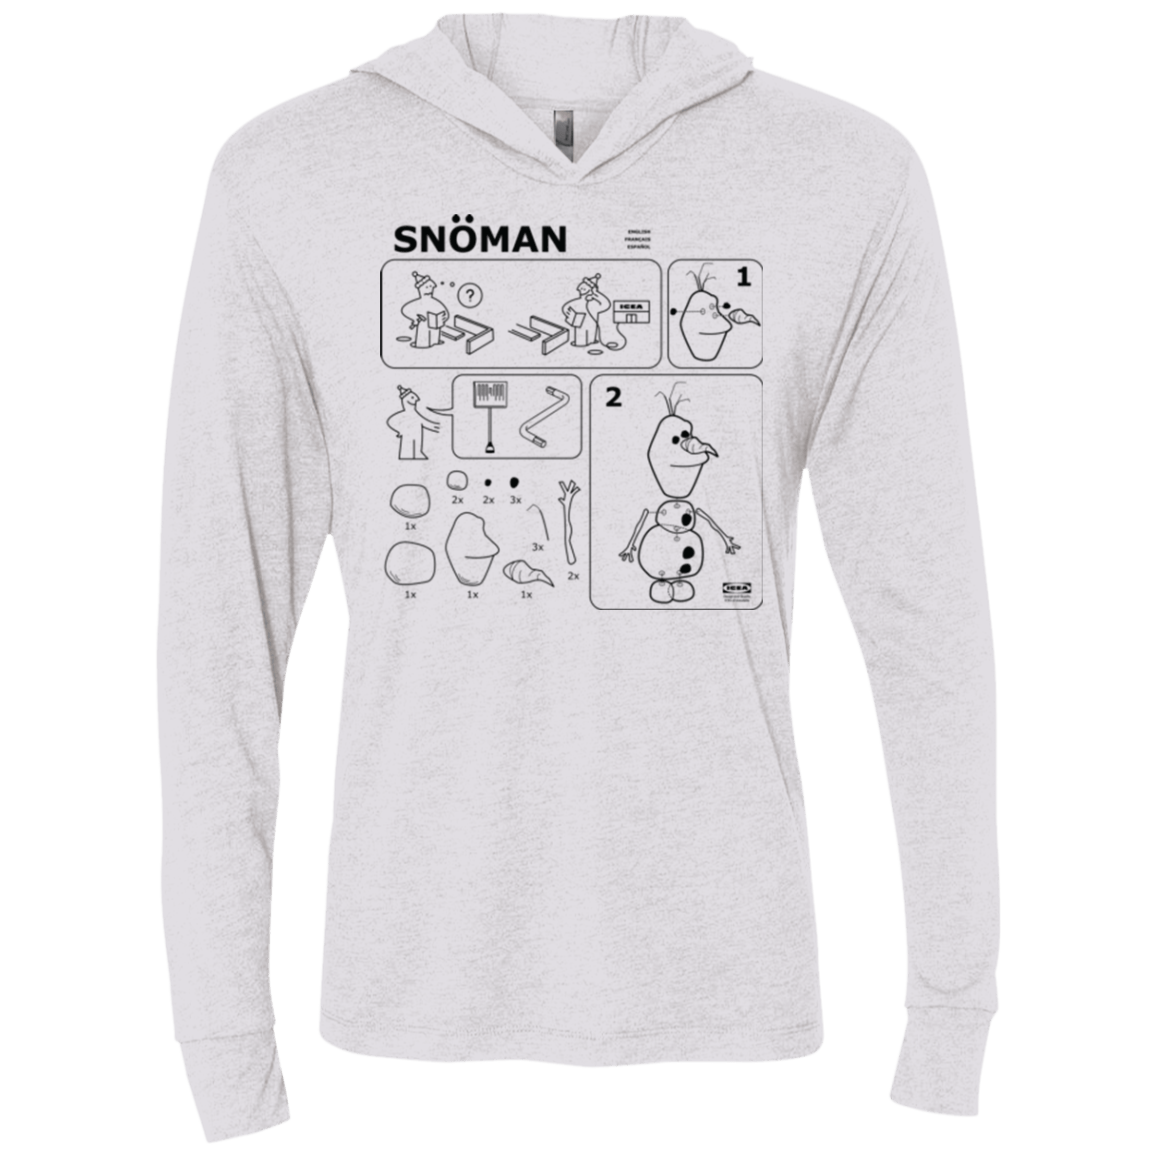 T-Shirts Heather White / X-Small Build a Snowman Triblend Long Sleeve Hoodie Tee